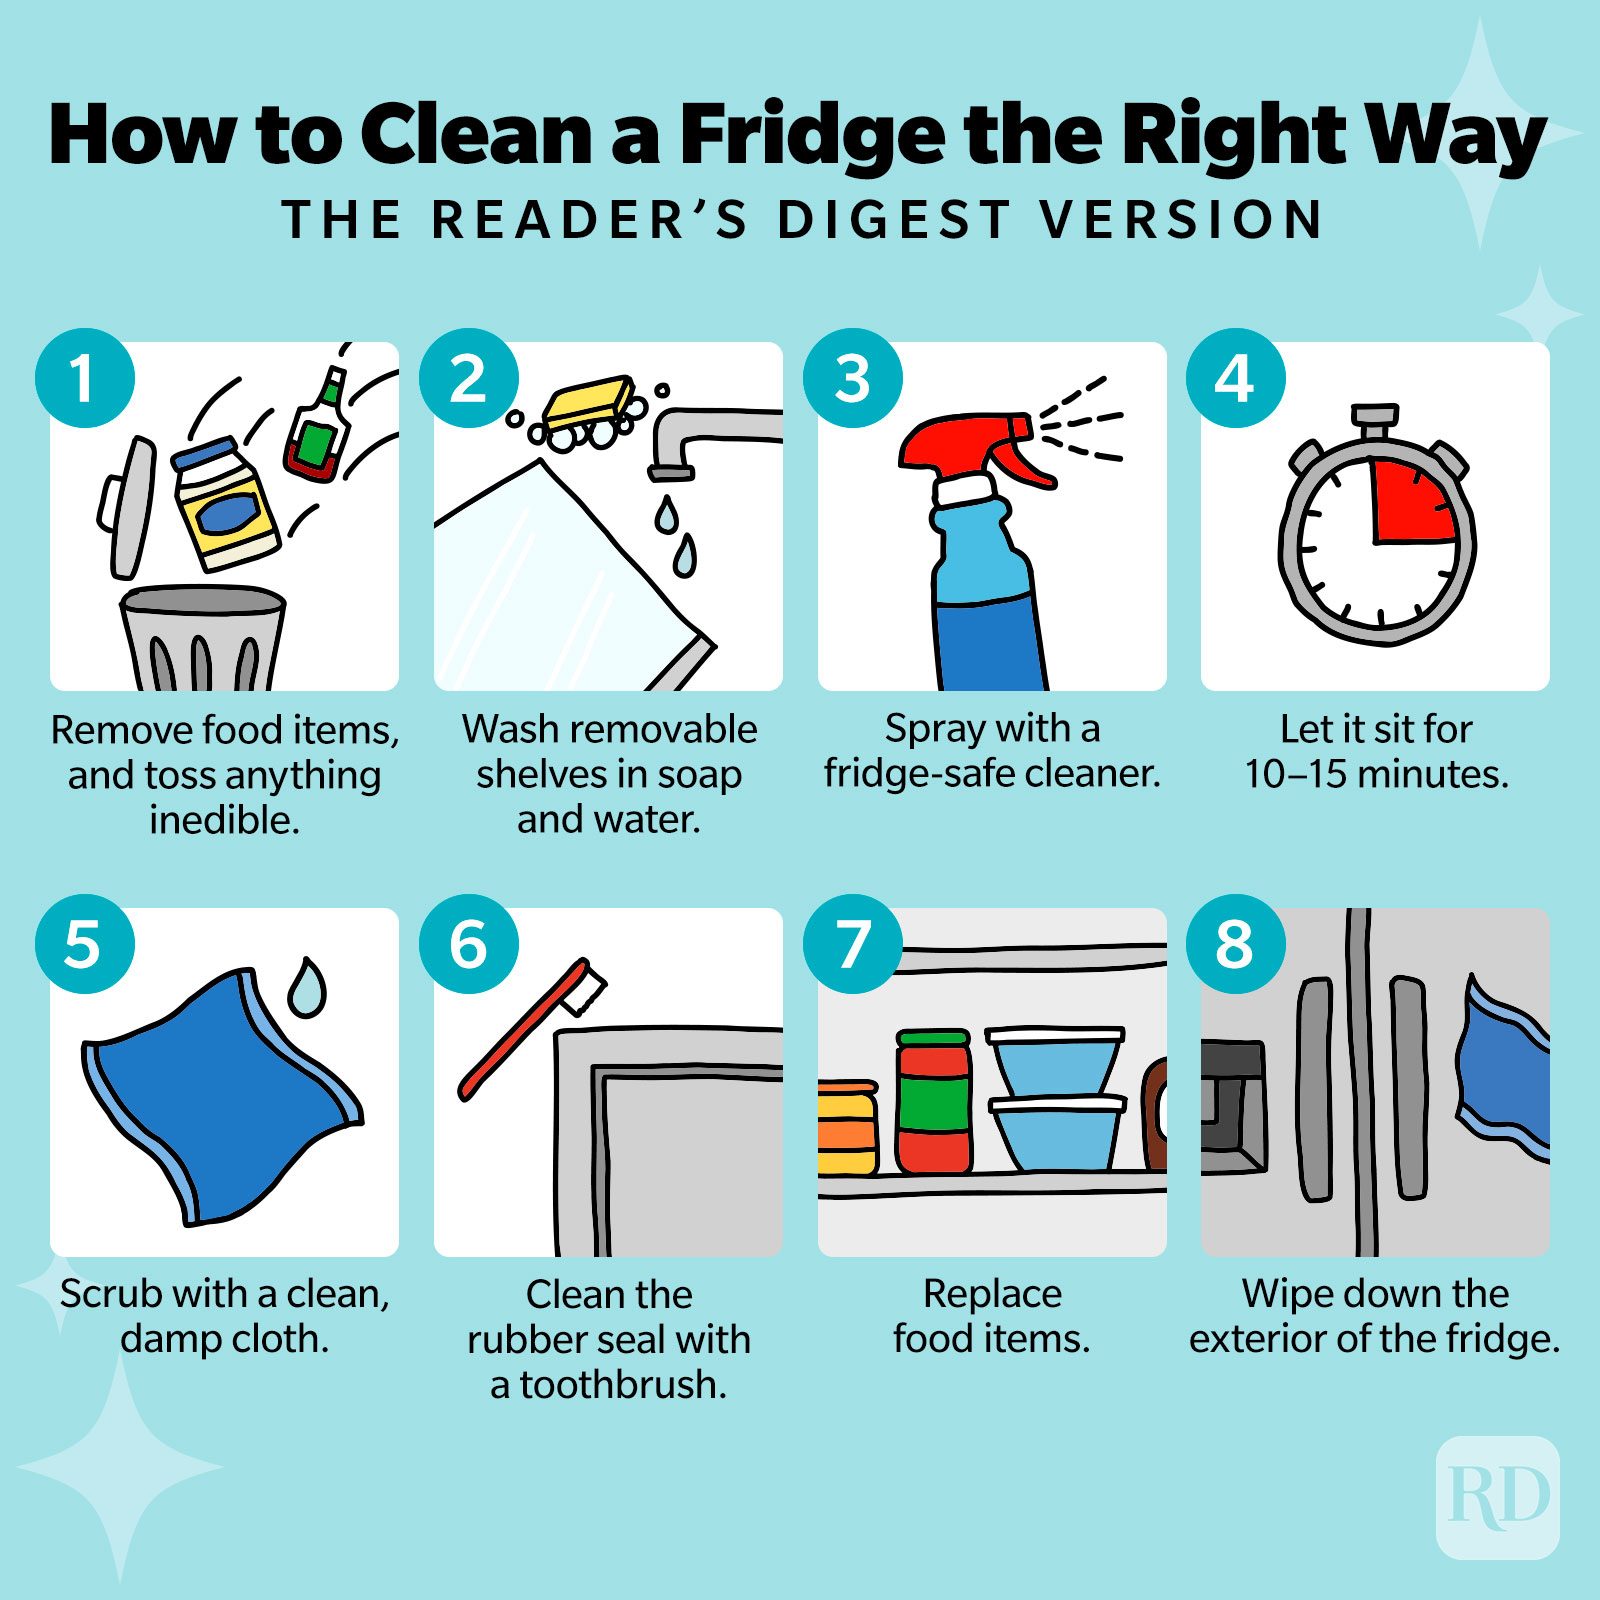 https://www.rd.com/wp-content/uploads/2023/04/How-to-Clean-a-Fridge-the-Right-Way-Infographic.jpg?fit=680%2C680